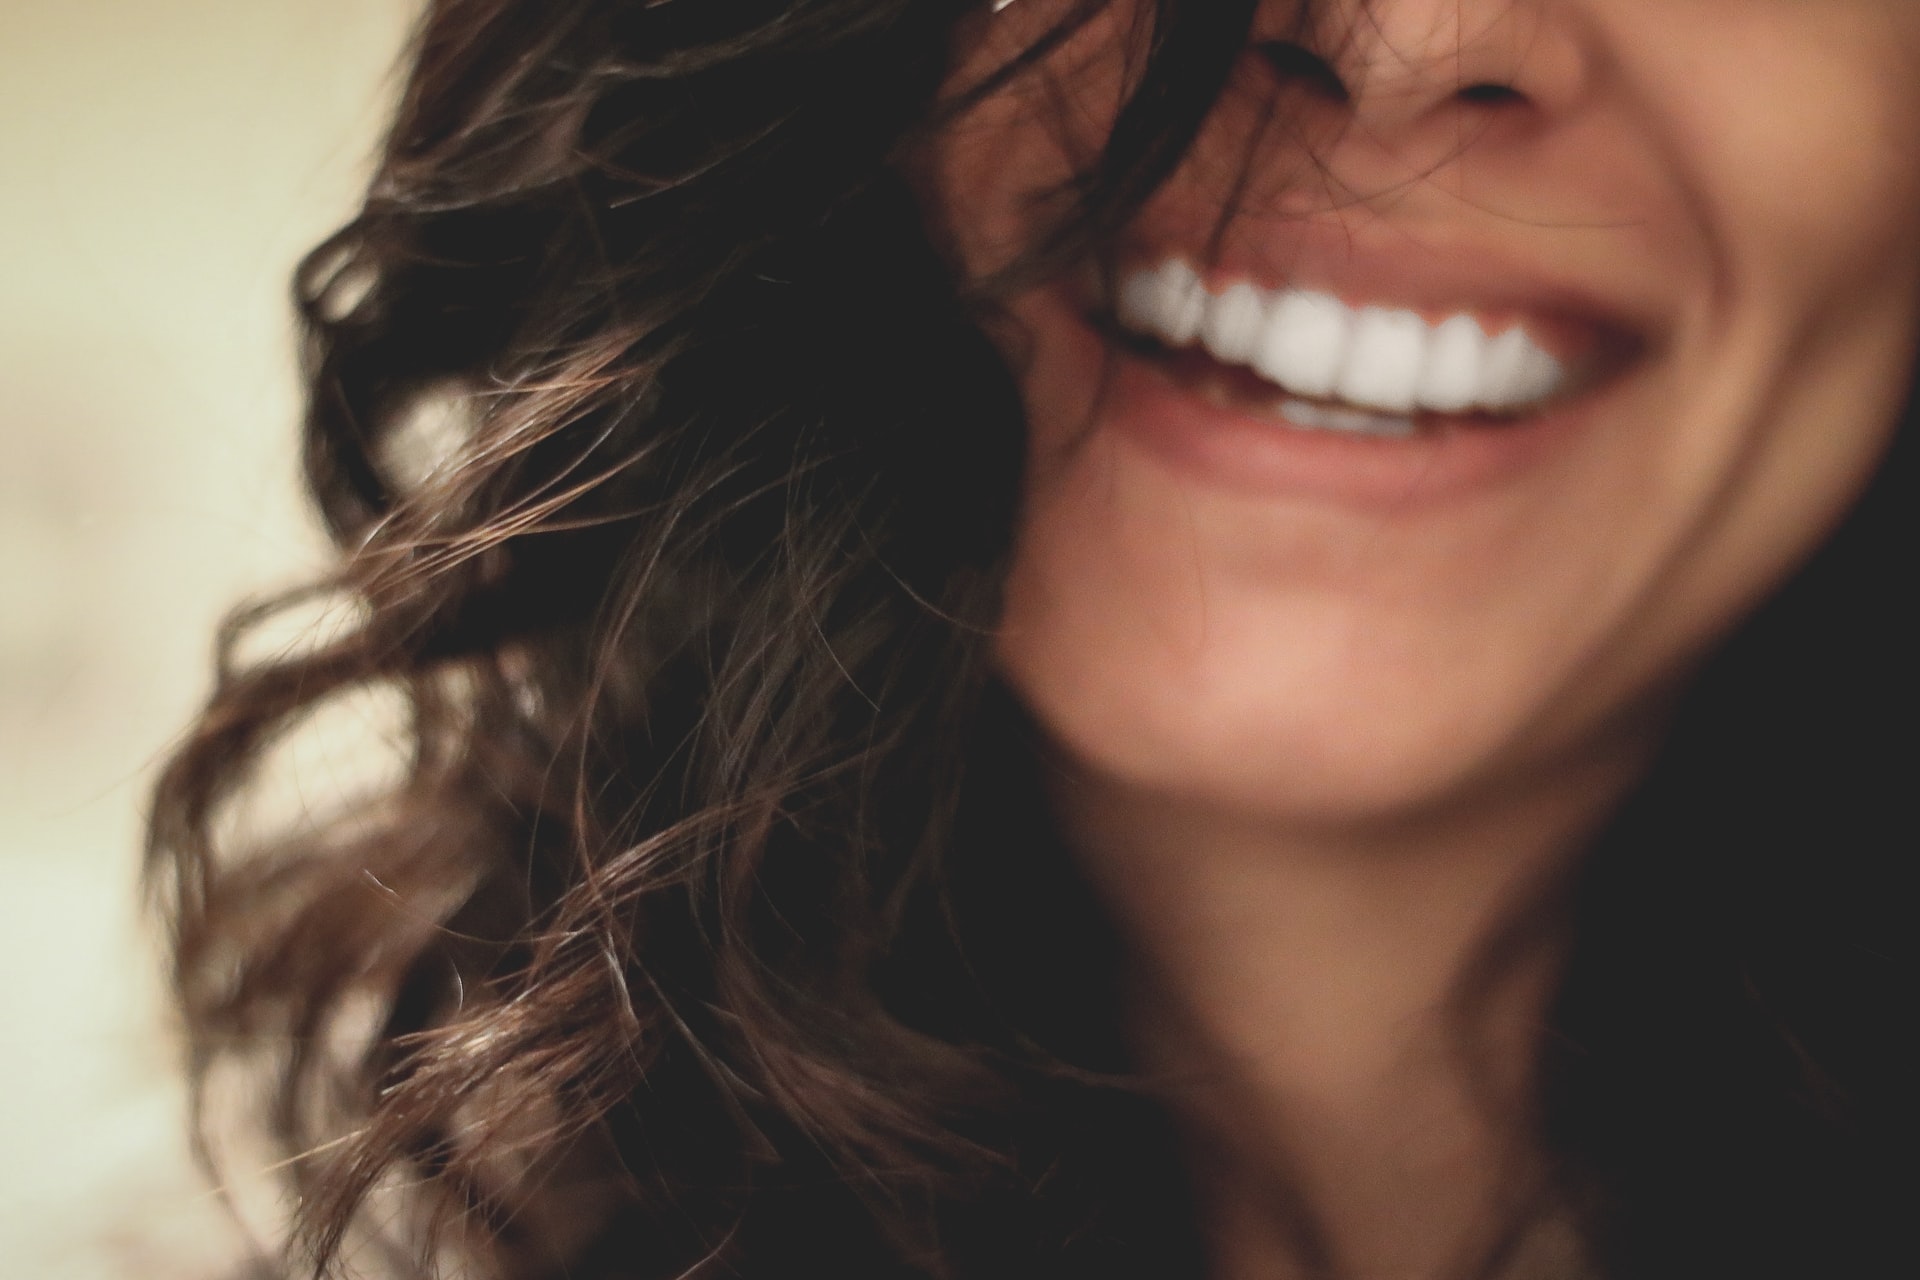 San Tan Valley Cosmetic Dentist. Can My Smile Sparkle?